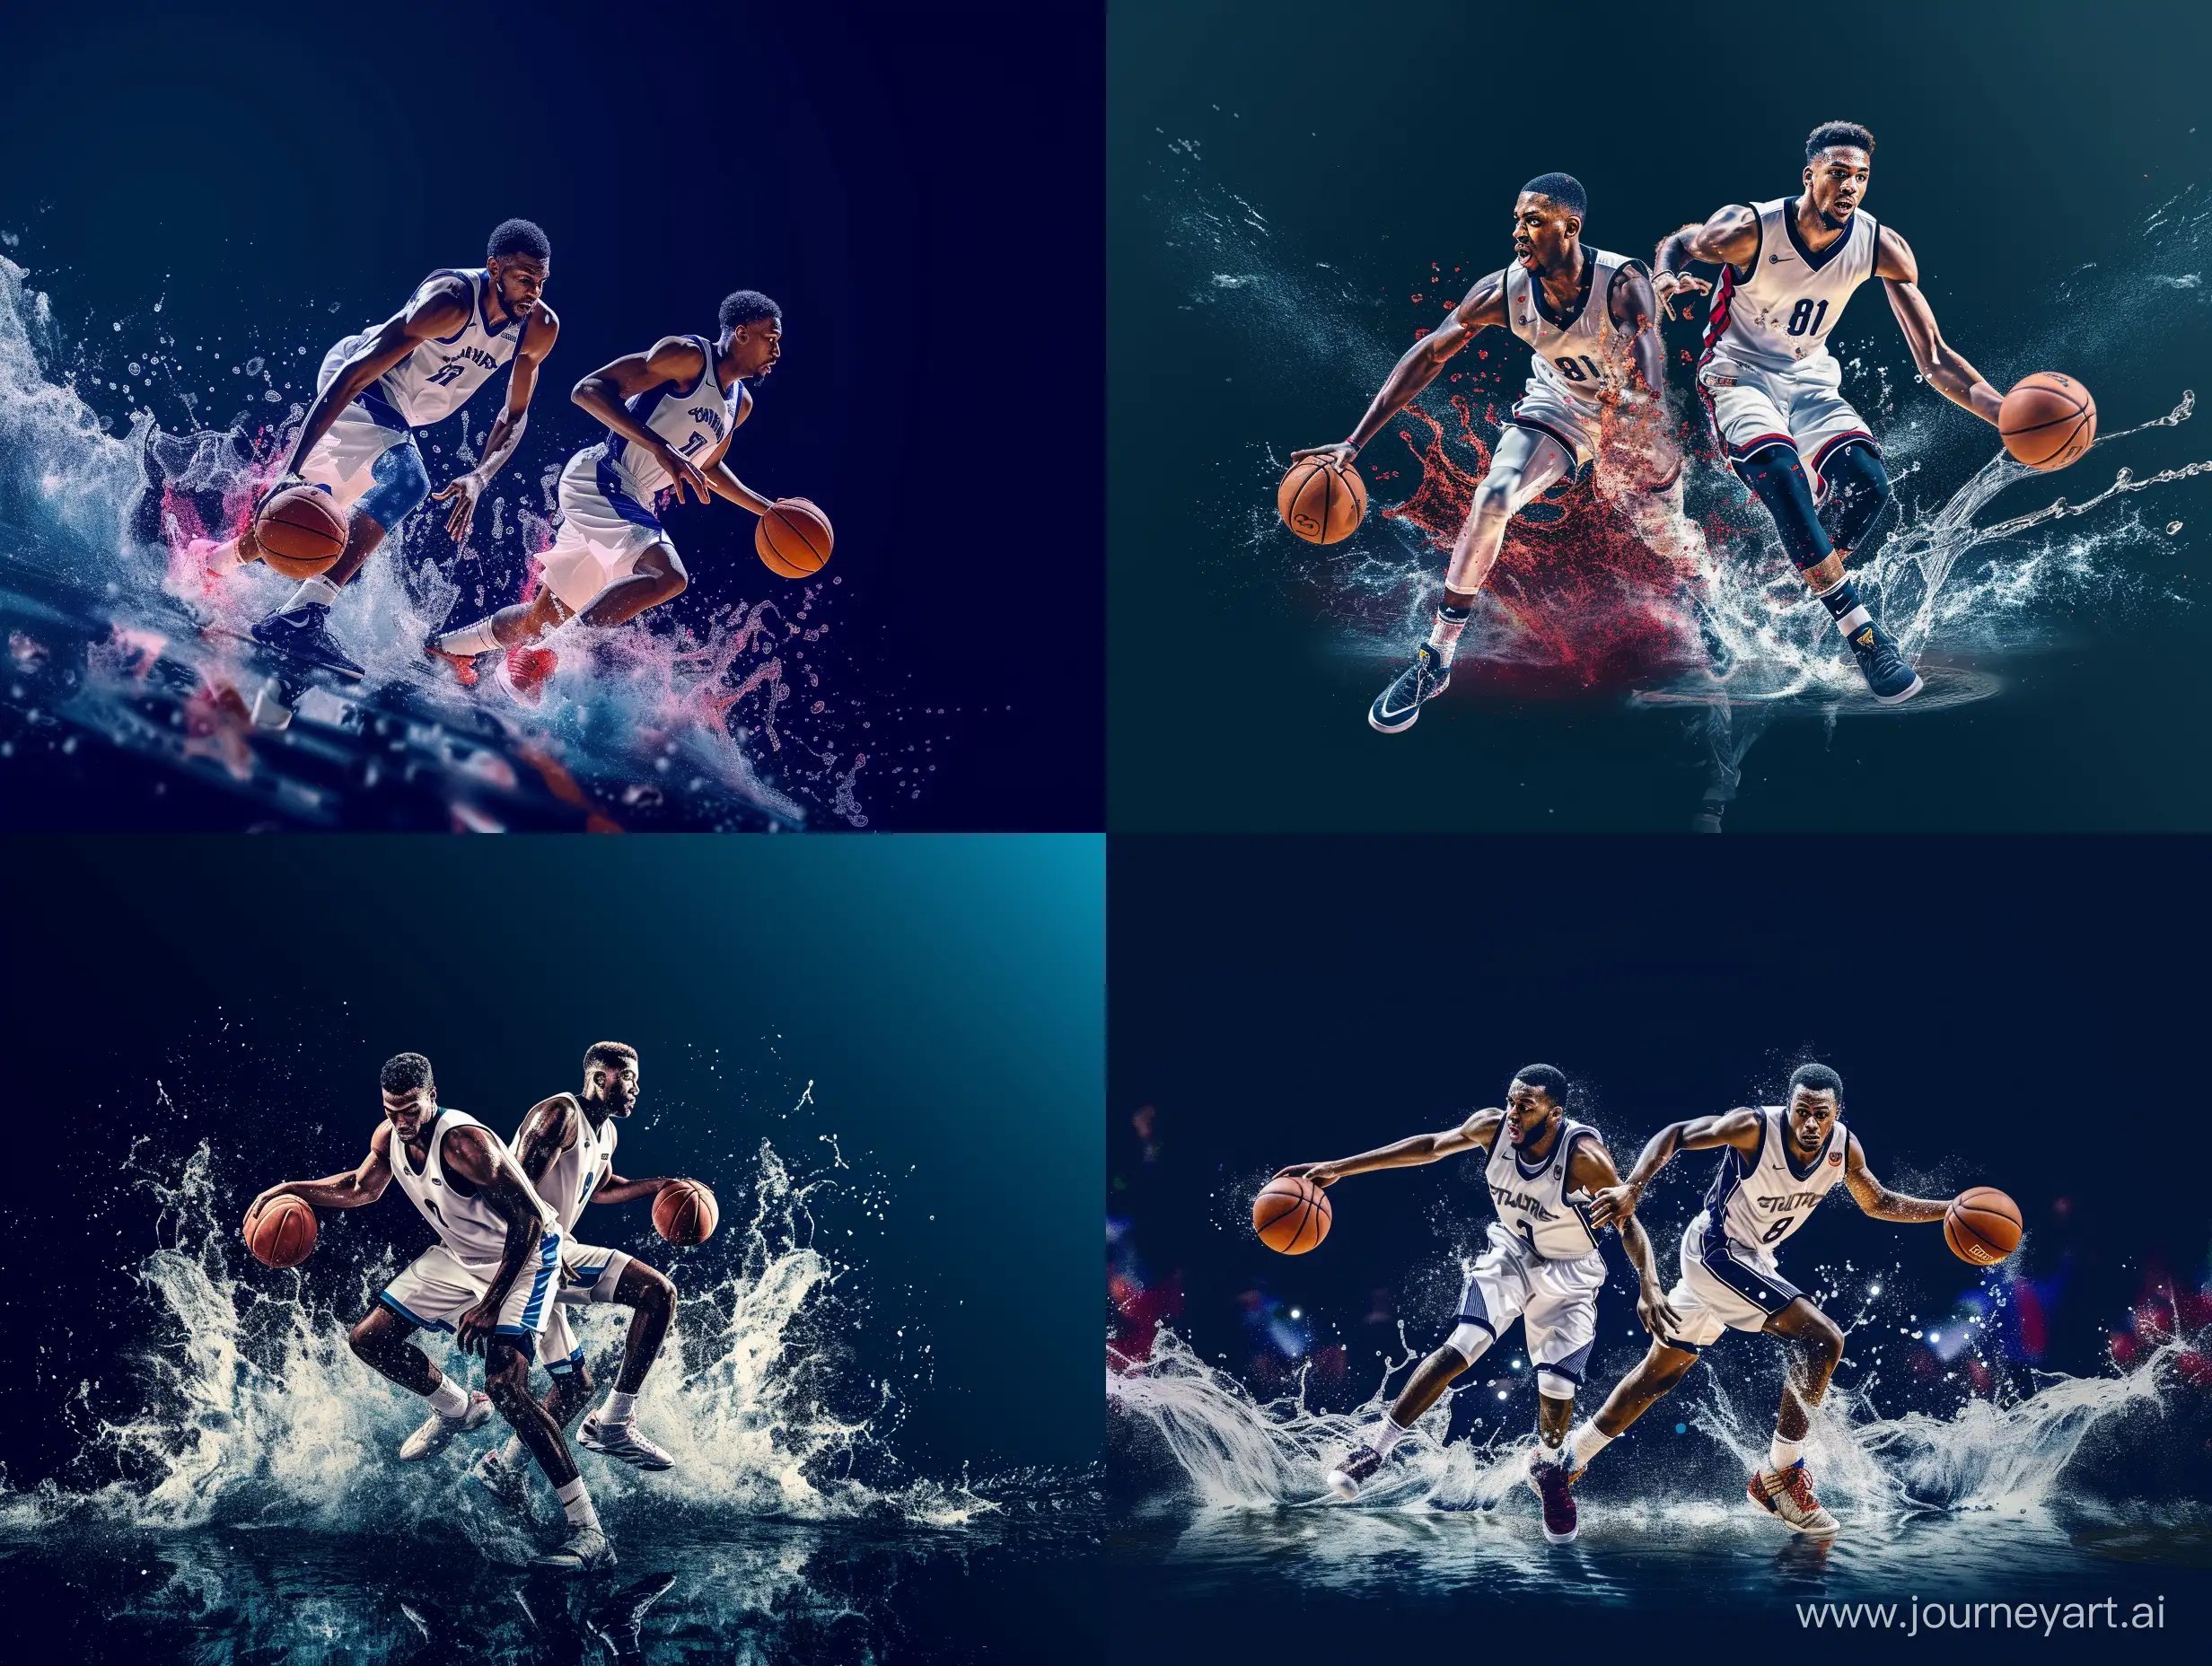 Intense-Basketball-Duel-on-Dynamic-Blue-Gradient-with-Water-Splashes-and-Smoke